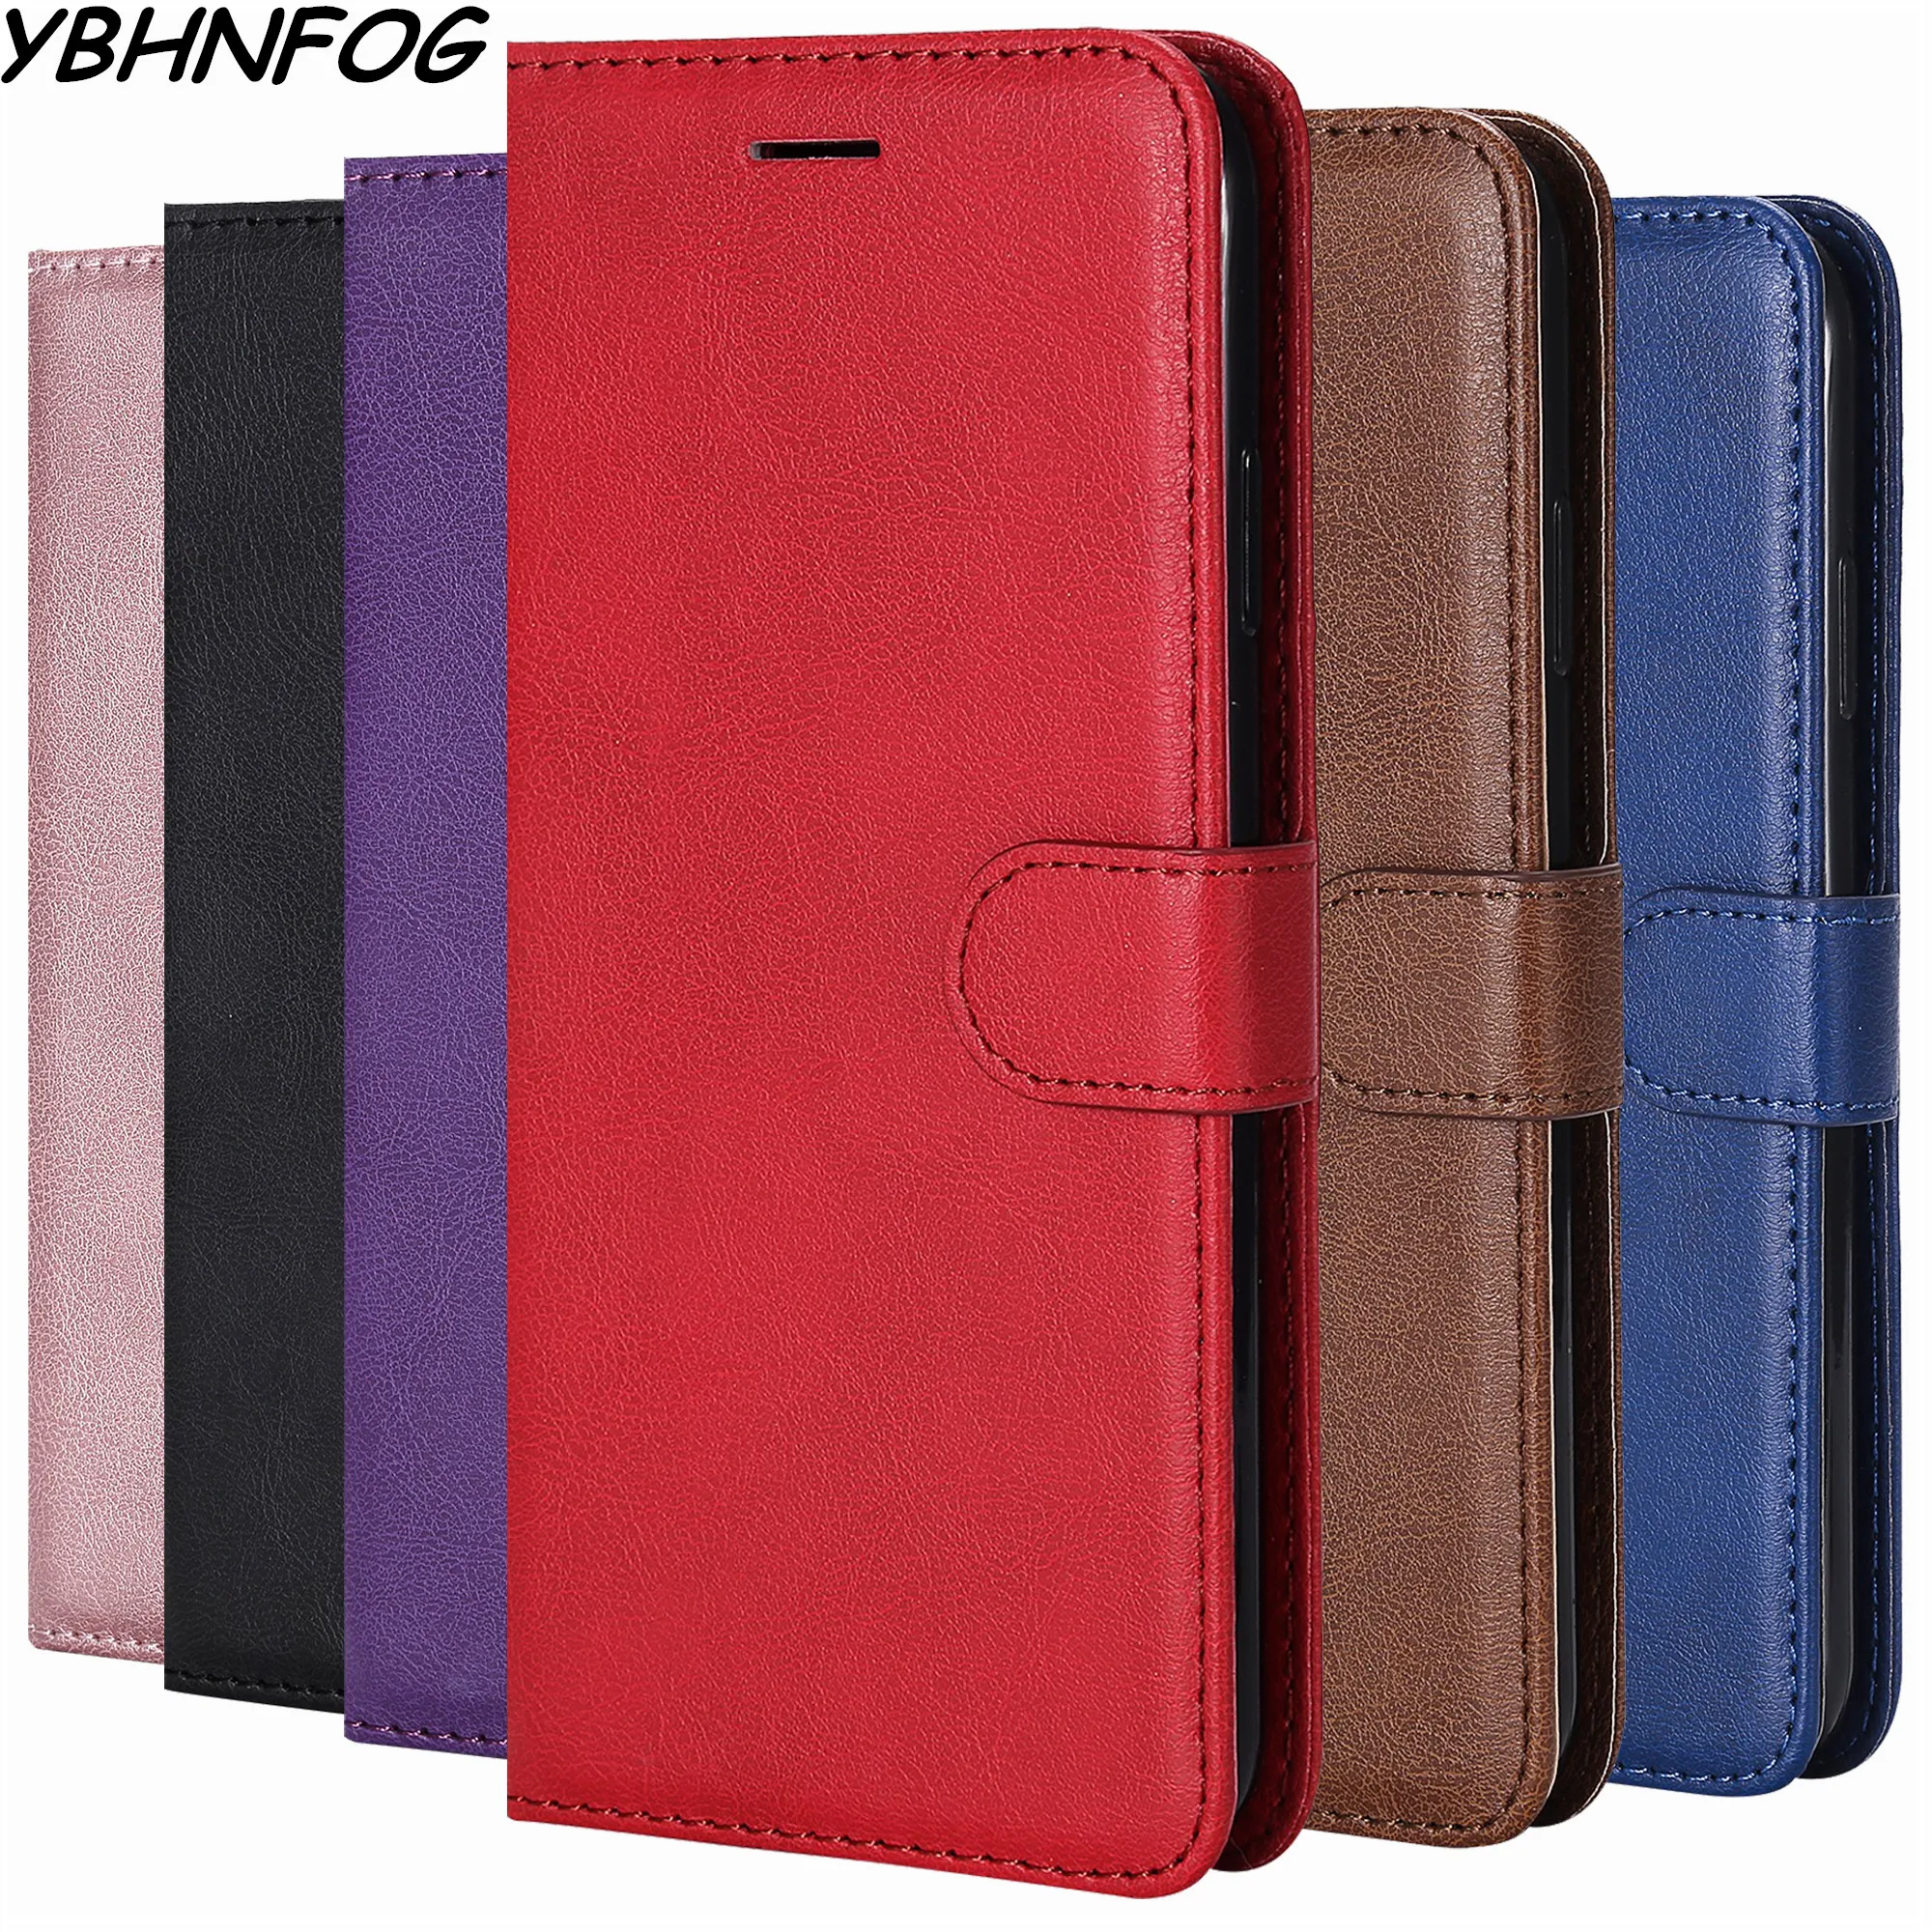 

For Xiaomi Redmi Note 7 8 Pro 4A 8A 8T Leather Flip Wallet Book Case For Red MI A3 9 Lite 9T 5 Plus 6 K20 Pro F1 Note 3 4X Cover